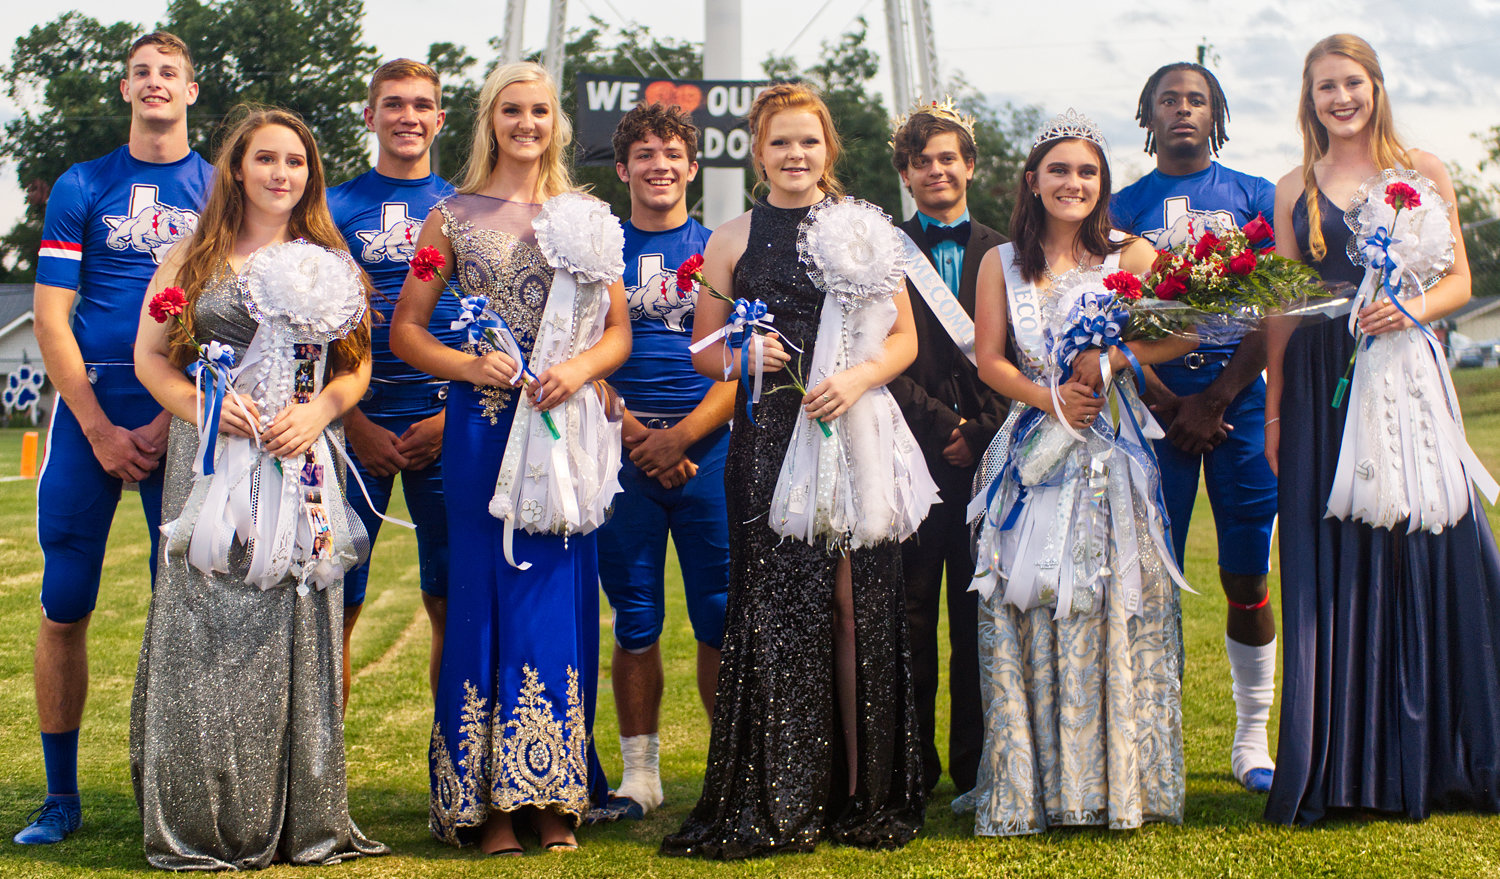 Quitman’s homecoming court includes, from left, Riley Flanagan, Jaci Coley, Ben Burroughs, Julia Simpkins, River Chaney, Shelby Hayes, Nicholas Barnett (king), Whitnee Weiher (queen), Trey Berry and Jentri Jackson.